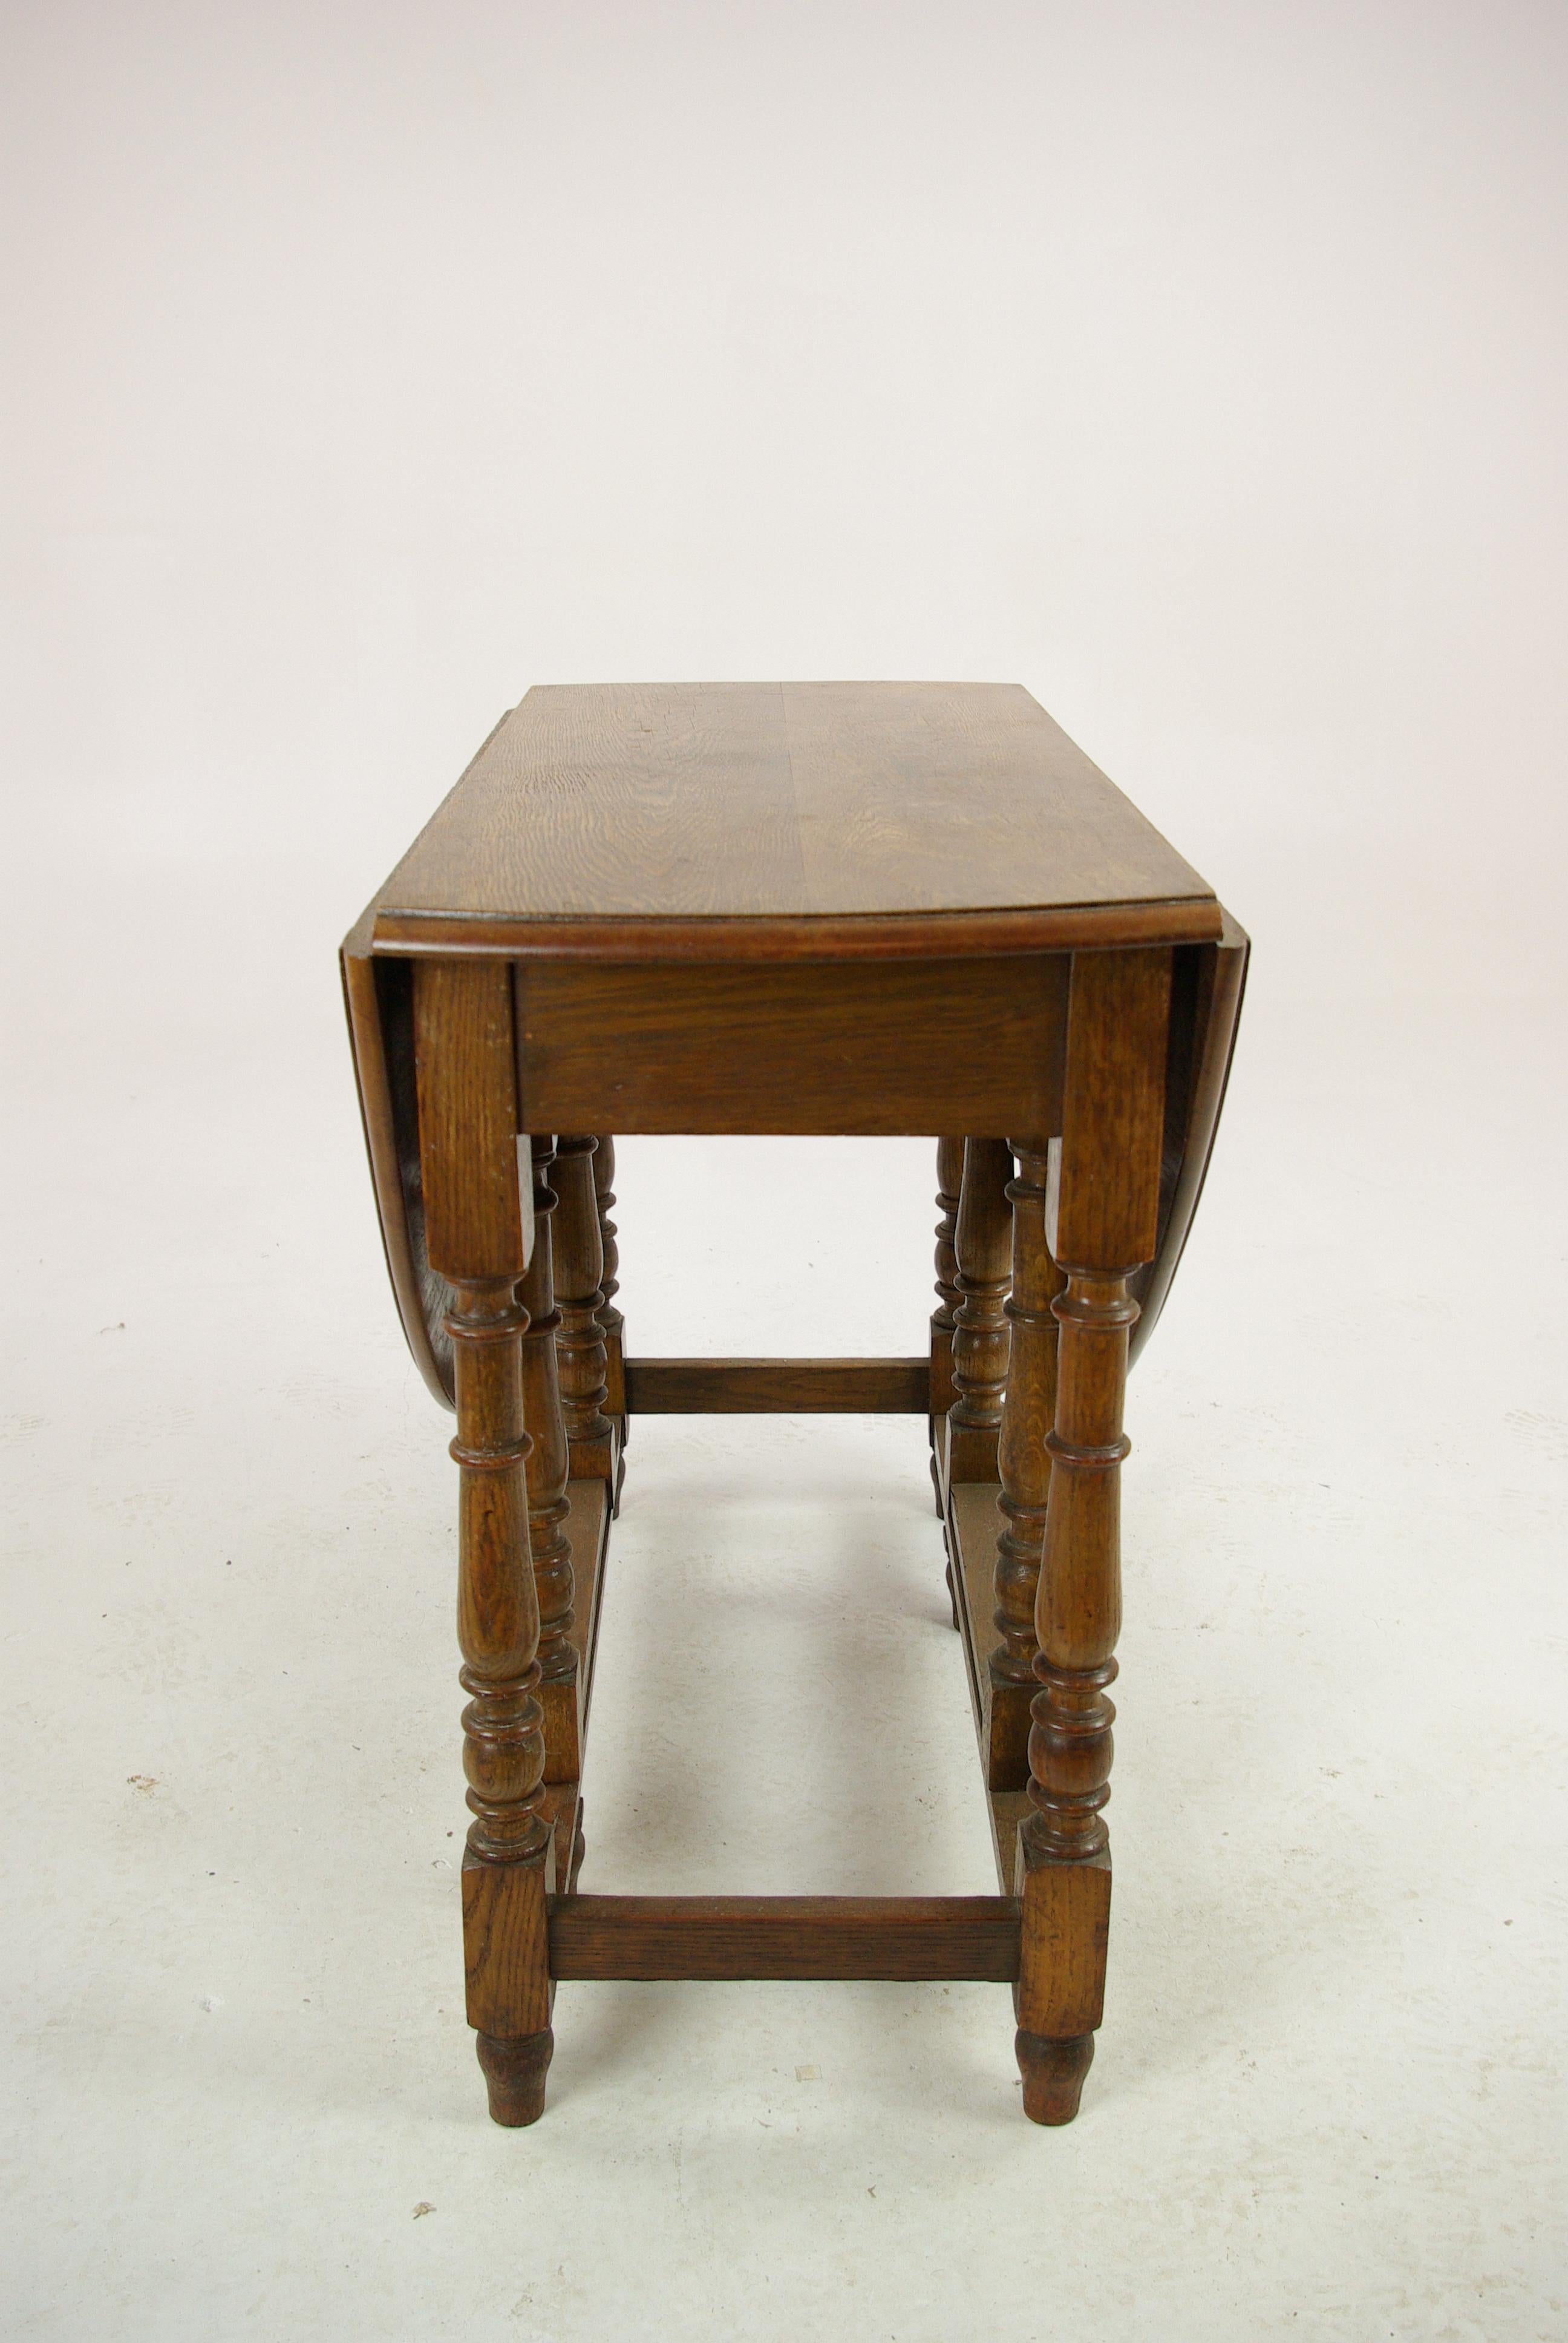 Antique gateleg table, oak oval drop leaf table, Scotland 1920s, antique furniture, B1419

Scotland, 1920s
Solid oak construction
Original finish
Two oval drop leaves to the side
Ending on thick turned legs
Joined by cross stitches
Very clean and in